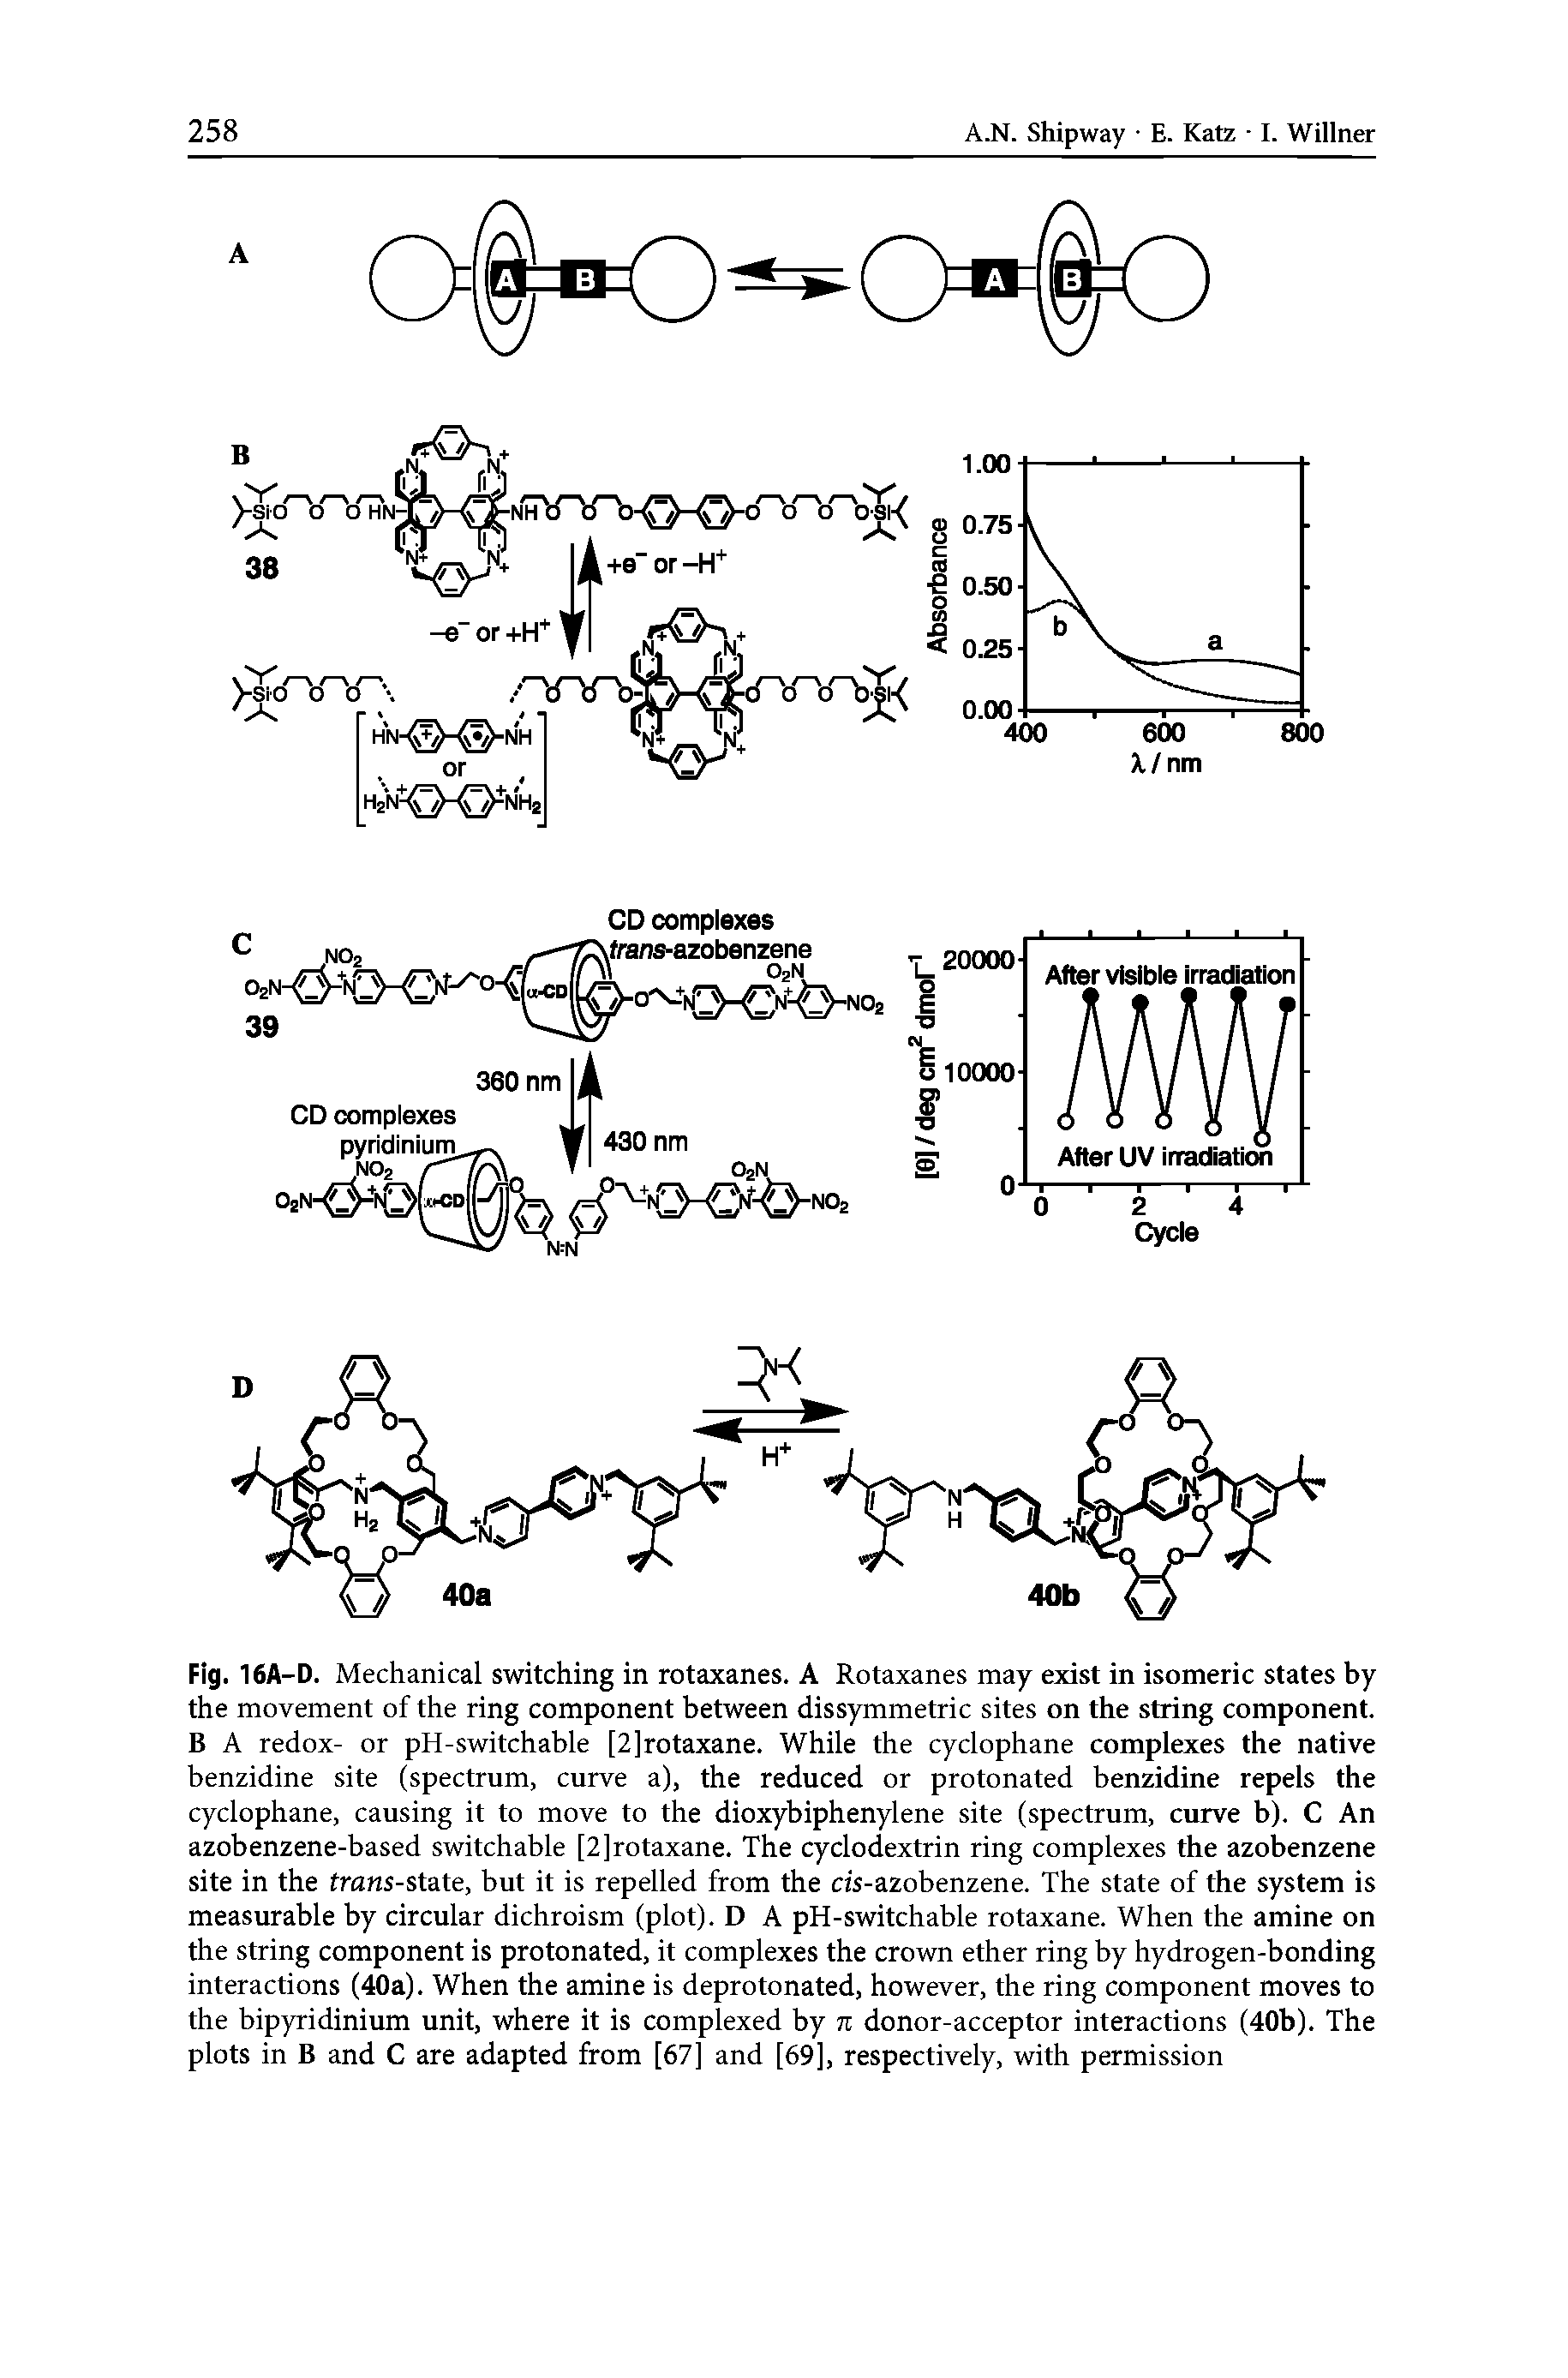 Fig. 16A-D. Mechanical switching in rotaxanes. A Rotaxanes may exist in isomeric states by the movement of the ring component between dissymmetric sites on the string component. B A redox- or pH-switchable [2]rotaxane. While the cyclophane complexes the native benzidine site (spectrum, curve a), the reduced or protonated benzidine repels the cyclophane, causing it to move to the dioxybiphenylene site (spectrum, curve b). C An azobenzene-based switchable [2]rotaxane. The cyclodextrin ring complexes the azobenzene site in the trans-state, but it is repelled from the ds-azobenzene. The state of the system is measurable by circular dichroism (plot). D A pH-switchable rotaxane. When the amine on the string component is protonated, it complexes the crown ether ring by hydrogen-bonding interactions (40a). When the amine is deprotonated, however, the ring component moves to the bipyridinium unit, where it is complexed by n donor-acceptor interactions (40b). The plots in B and C are adapted from [67] and [69], respectively, with permission...